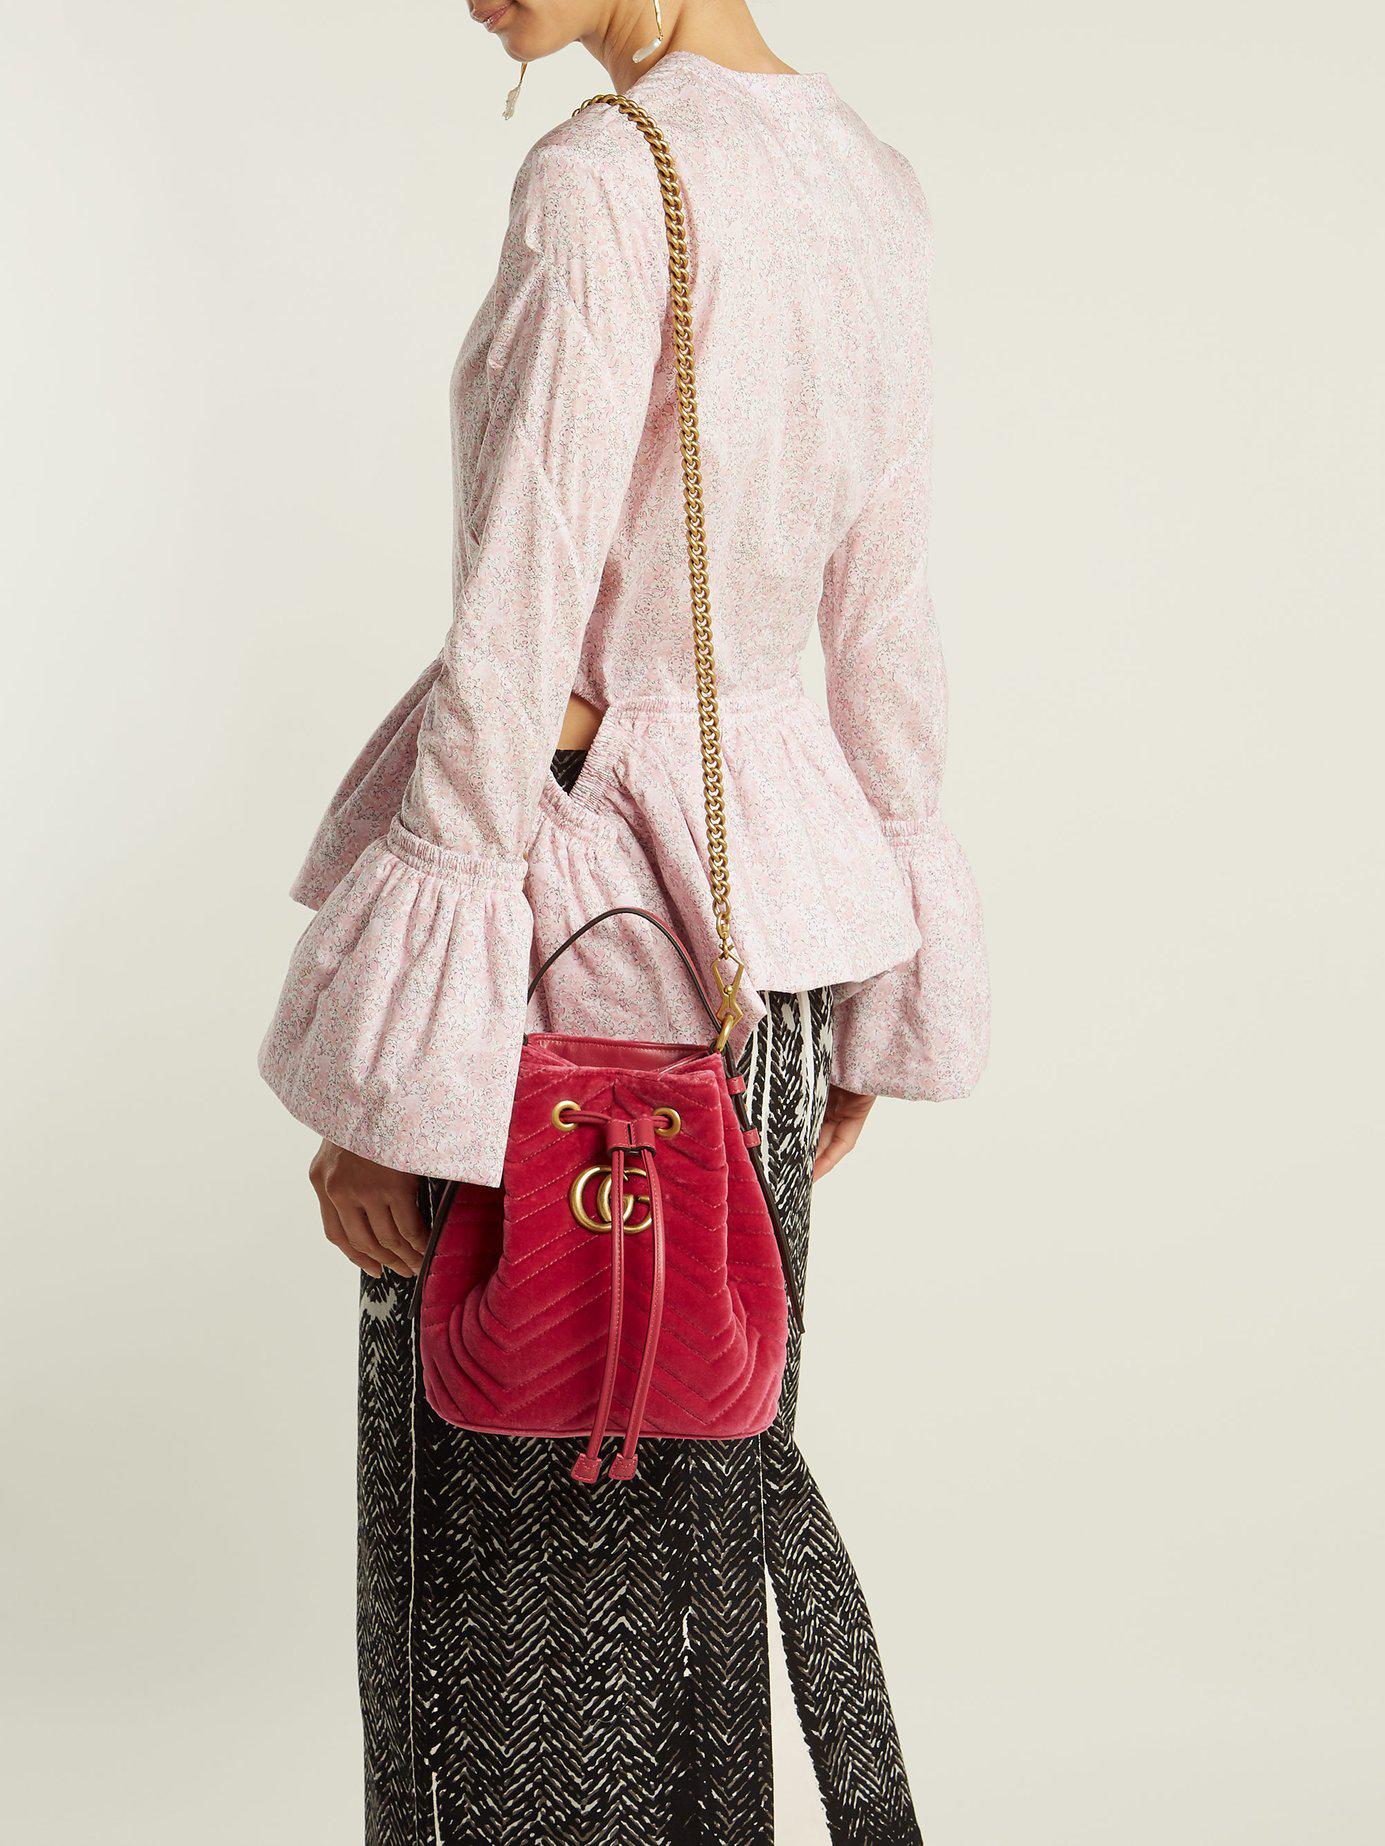 Gucci Gg Marmont Quilted Velvet Drawstring Bucket Bag in Pink - Lyst